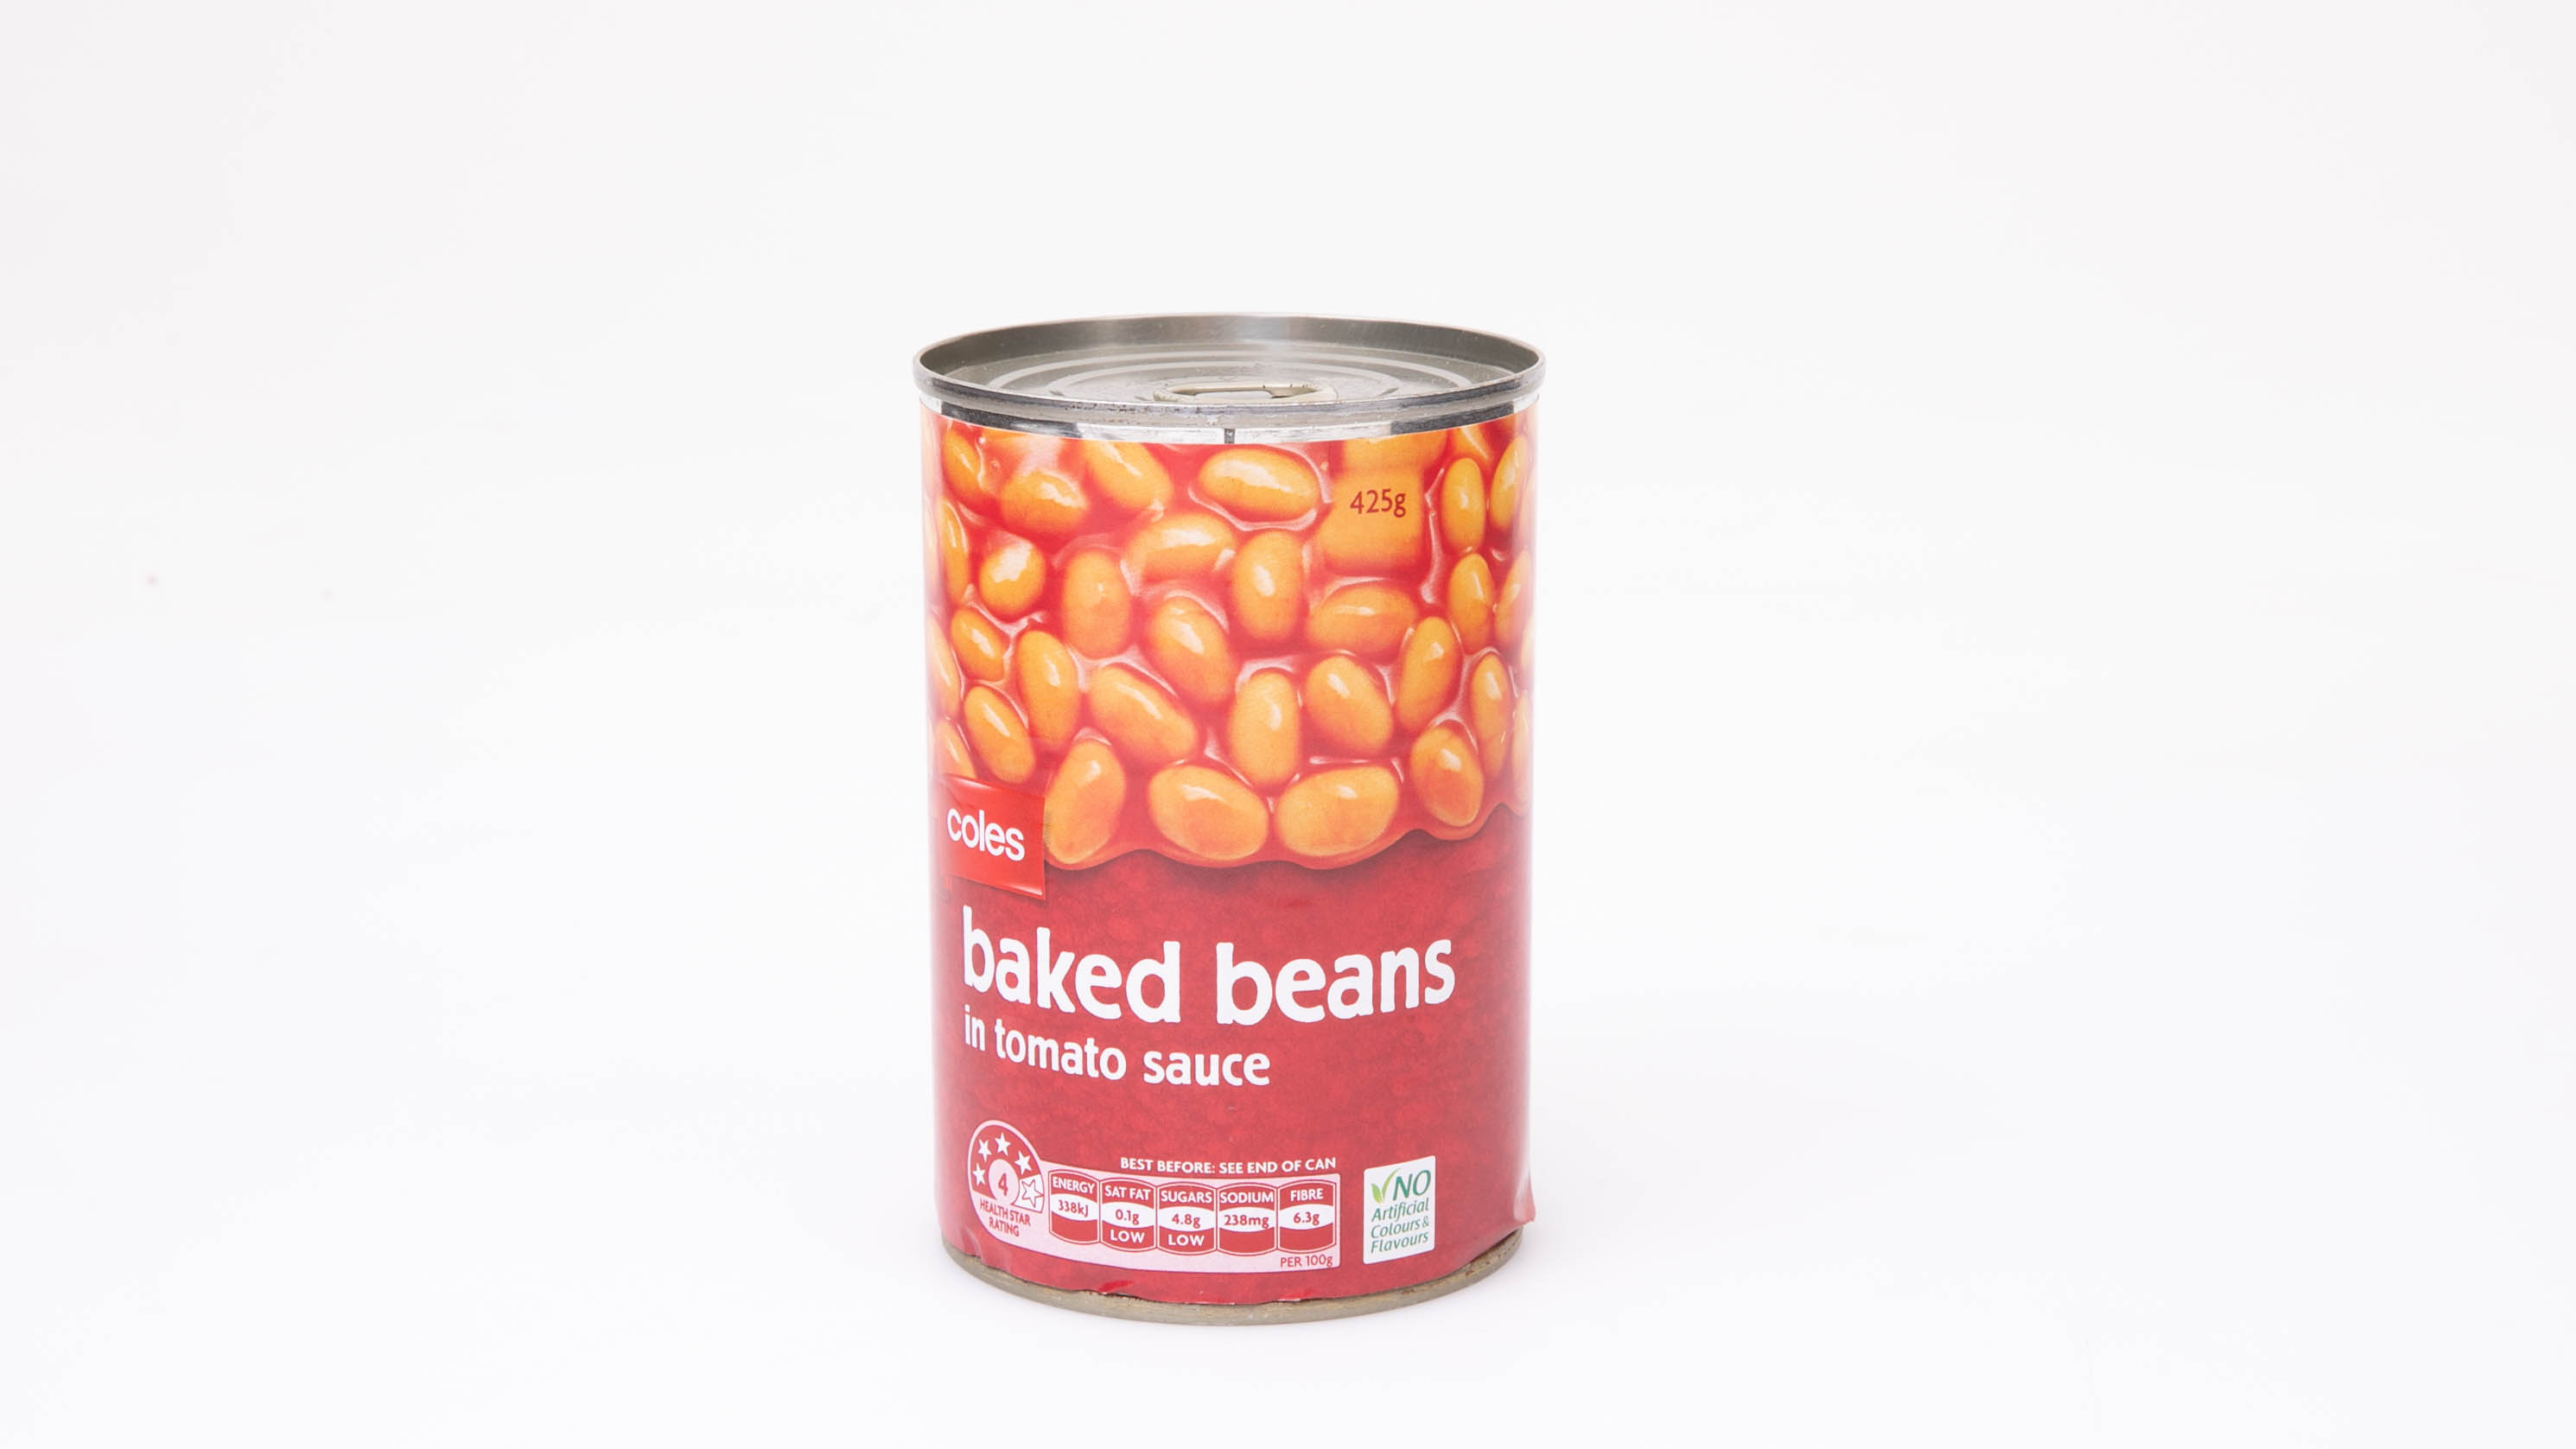 Coles Baked Beans in Tomato Sauce carousel image